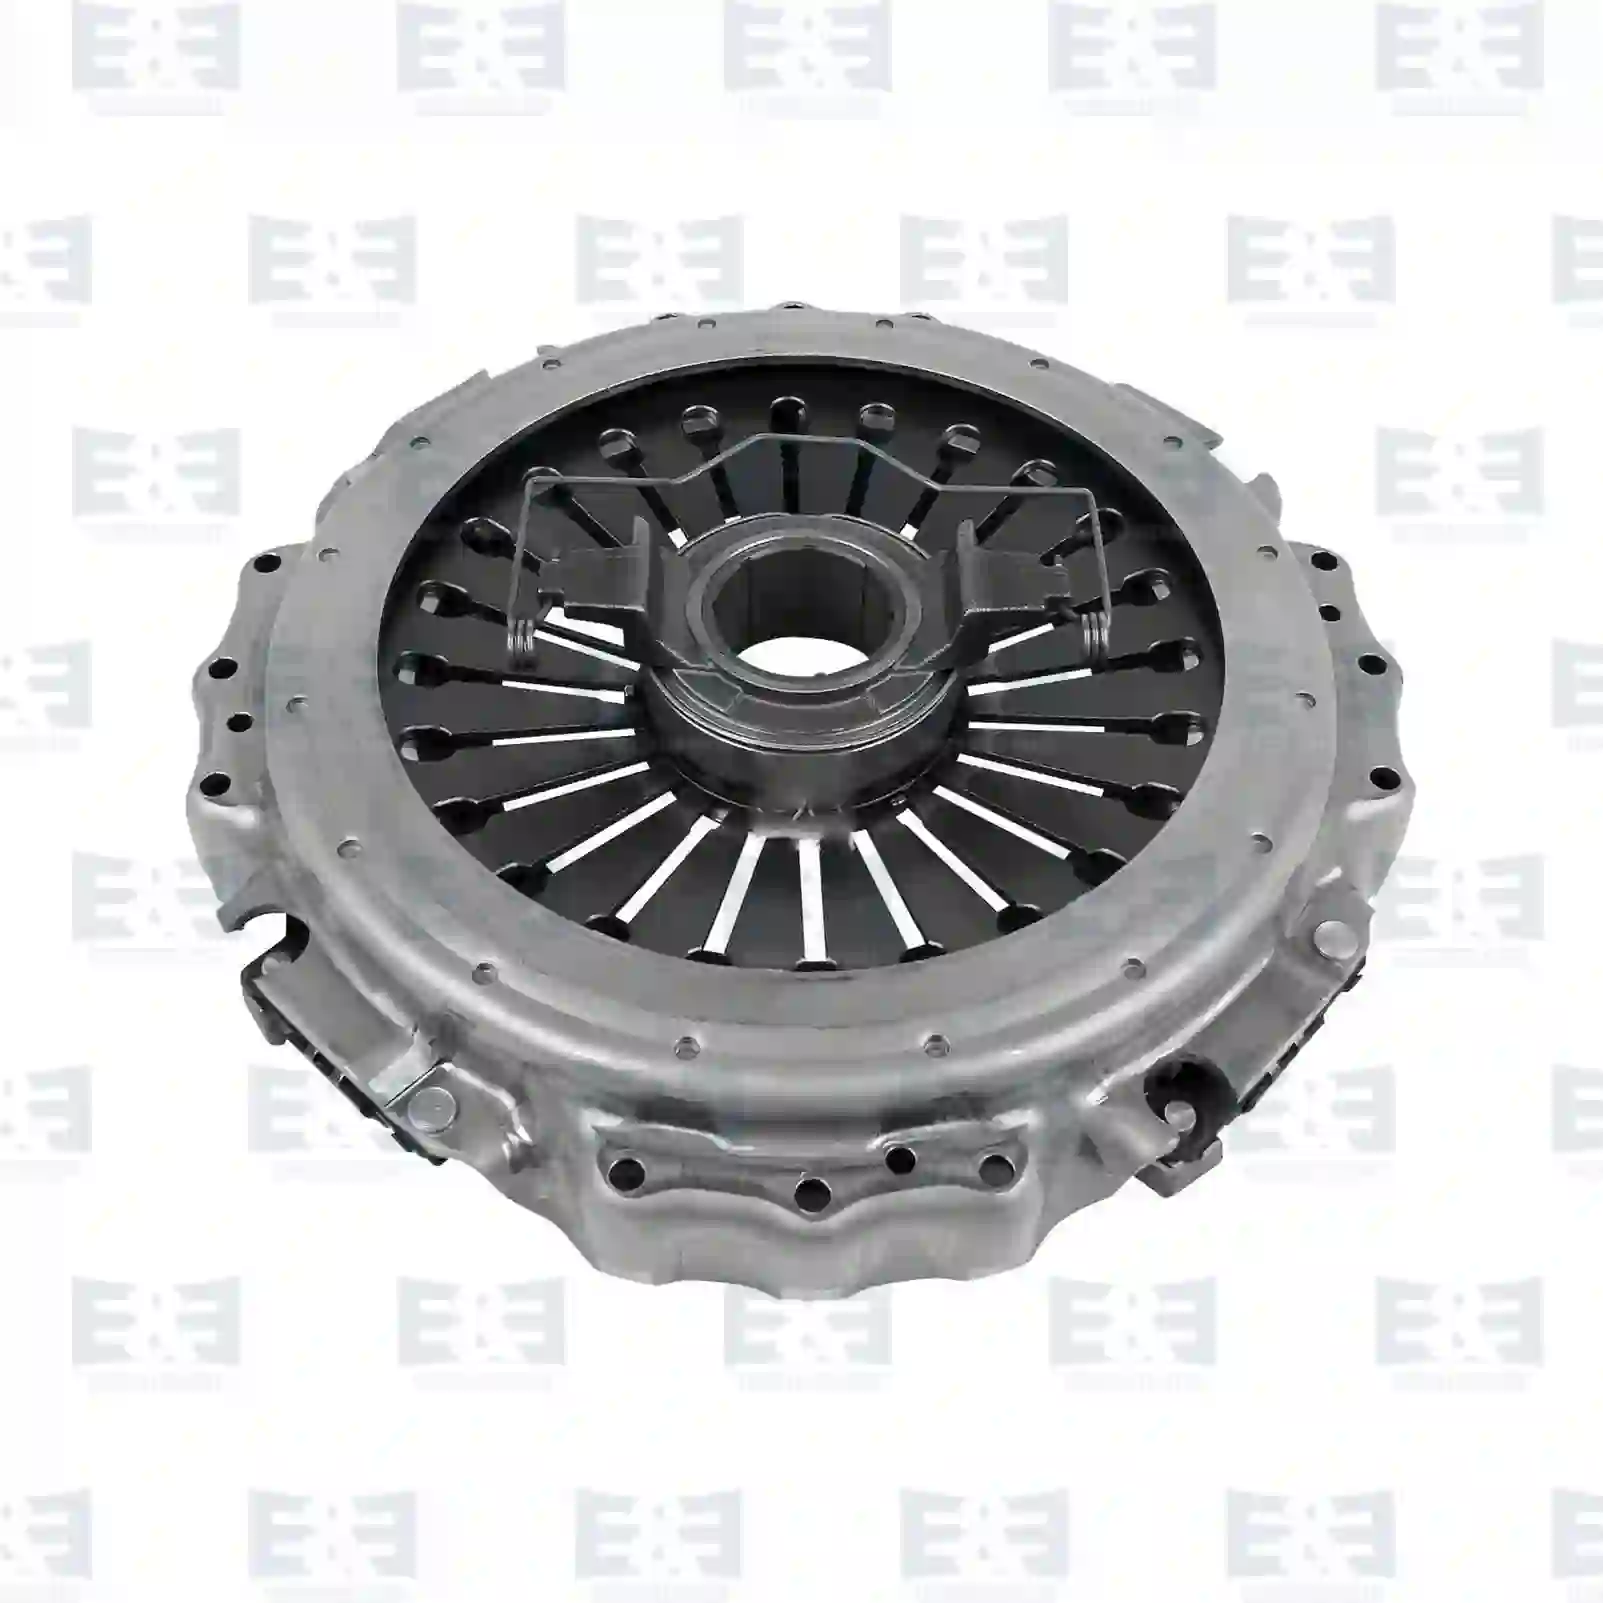 Clutch cover, with release bearing, 2E2288708, 20366765, 20569147, 85000235, 85000530 ||  2E2288708 E&E Truck Spare Parts | Truck Spare Parts, Auotomotive Spare Parts Clutch cover, with release bearing, 2E2288708, 20366765, 20569147, 85000235, 85000530 ||  2E2288708 E&E Truck Spare Parts | Truck Spare Parts, Auotomotive Spare Parts